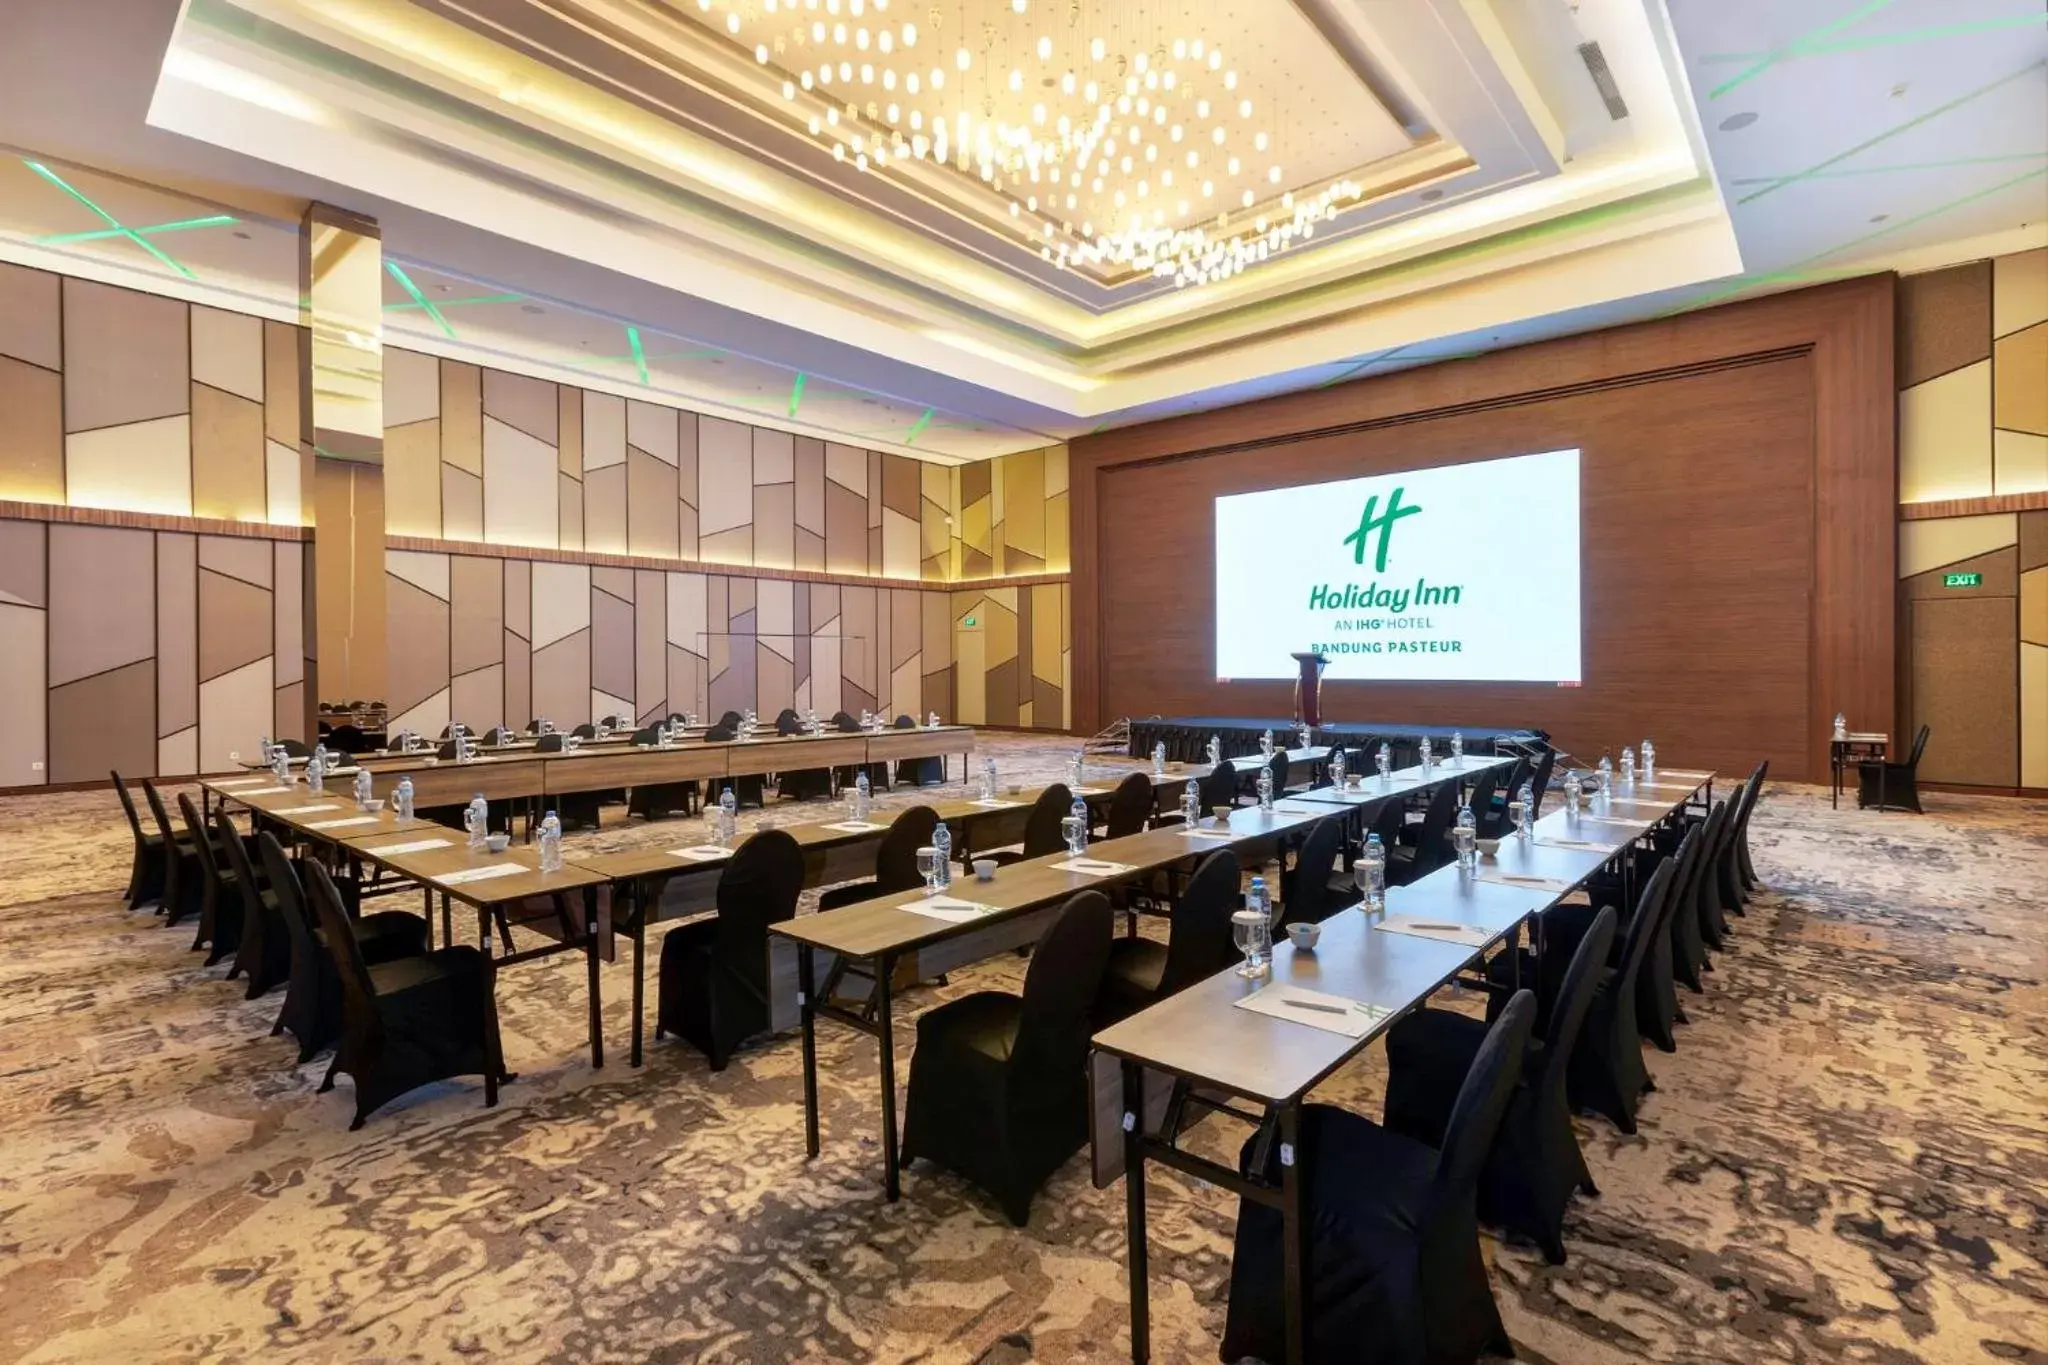 Meeting/conference room, Business Area/Conference Room in Holiday Inn Bandung Pasteur, an IHG Hotel